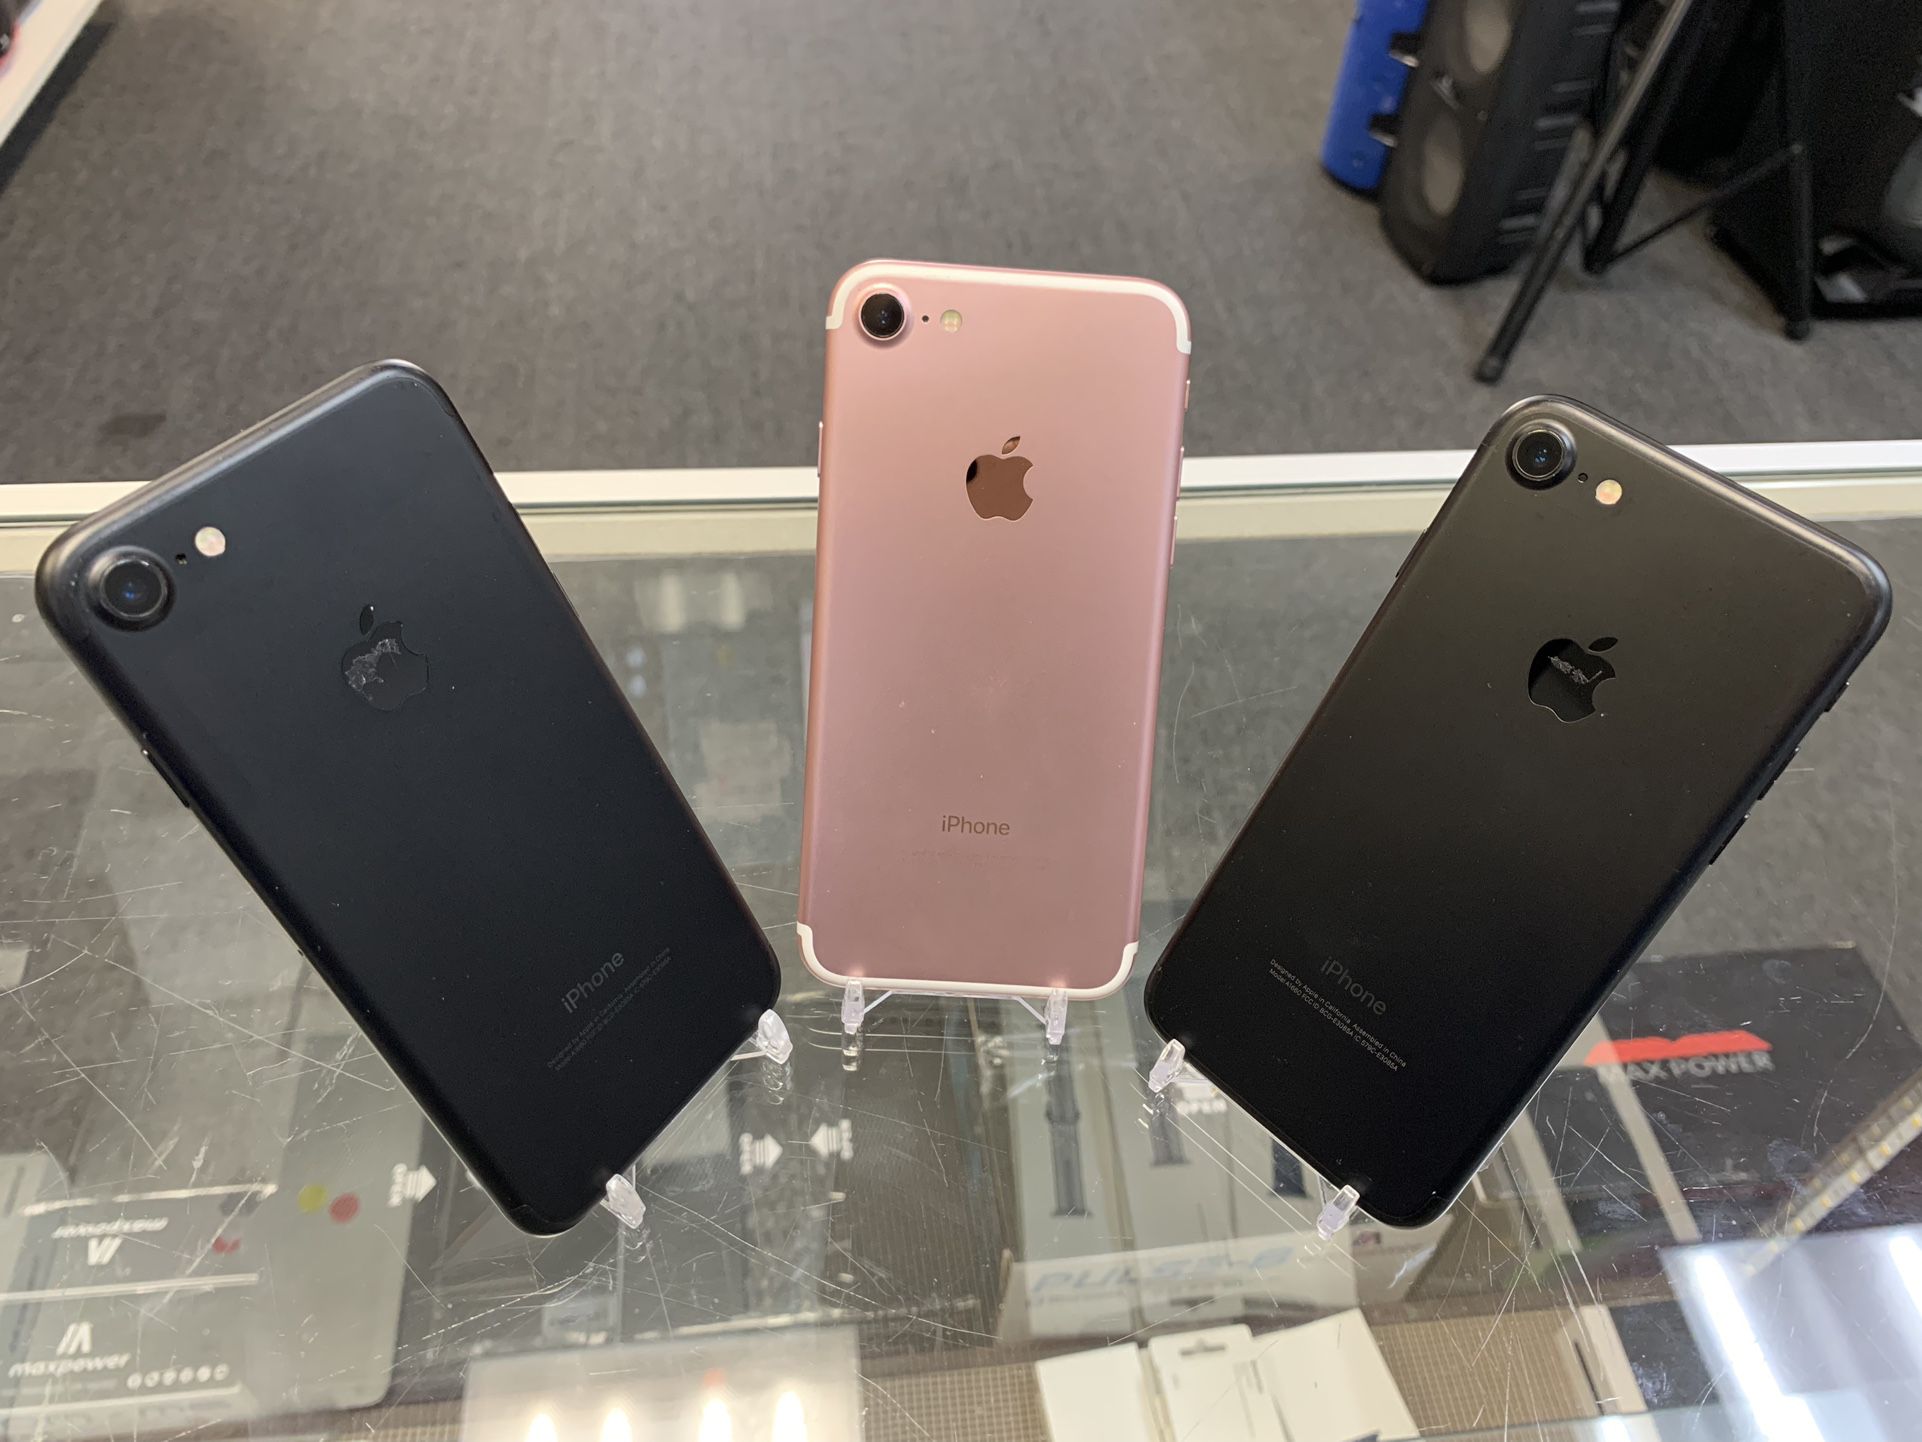 iPhone 7 AT&T/ Cricket/ T-Mobile/ Metro/ Unlocked 